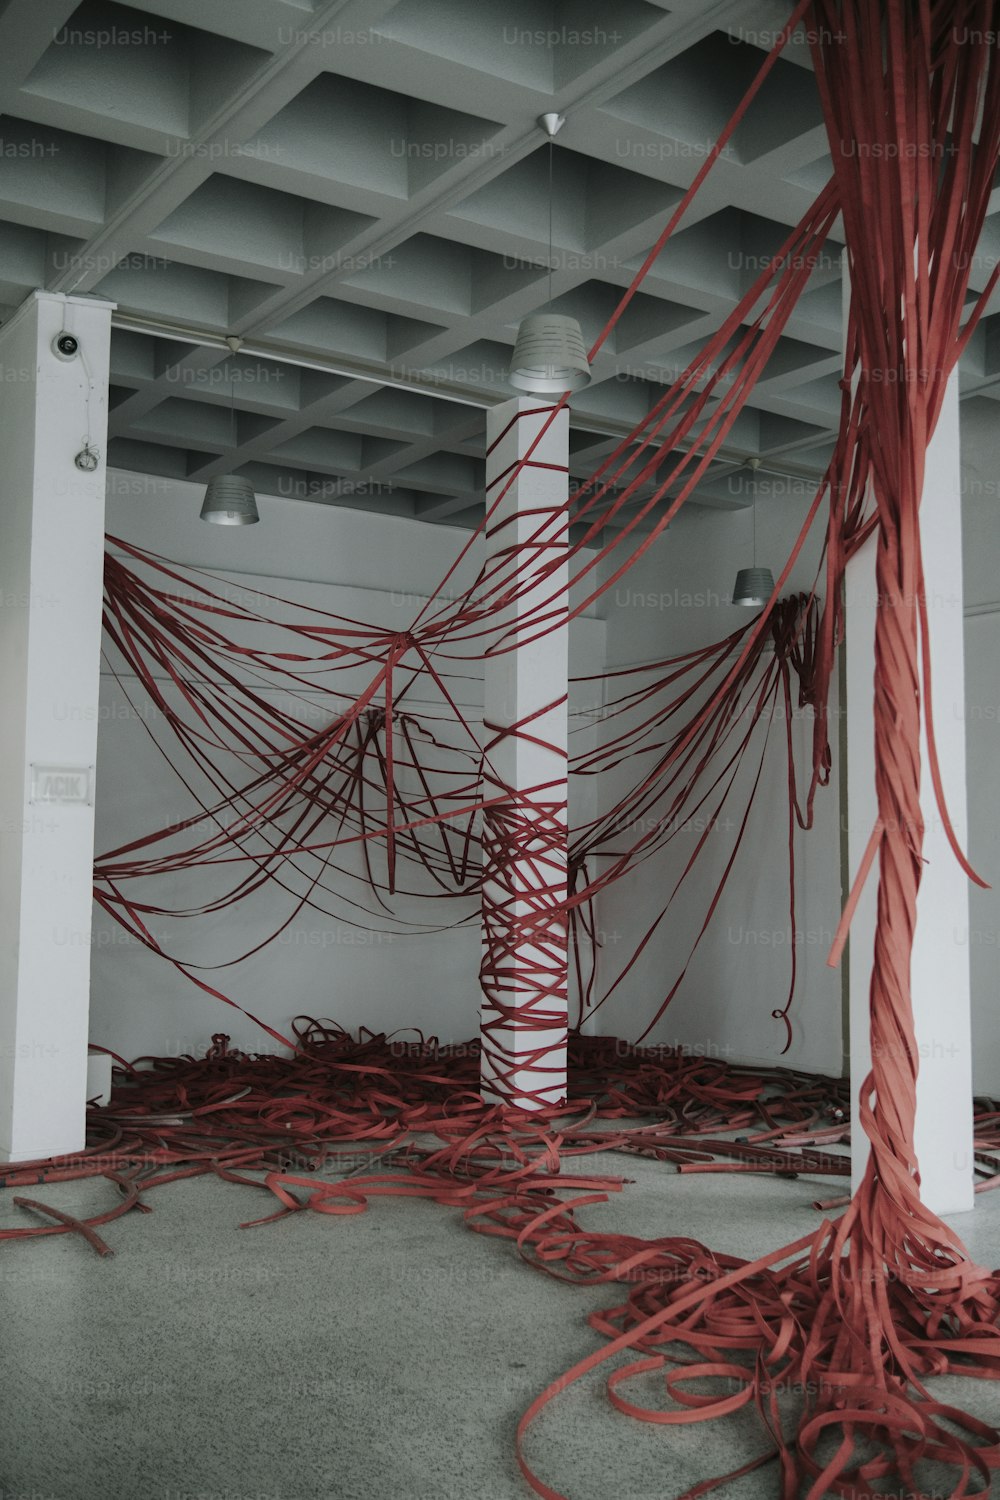 a bunch of wires are tangled up in a room